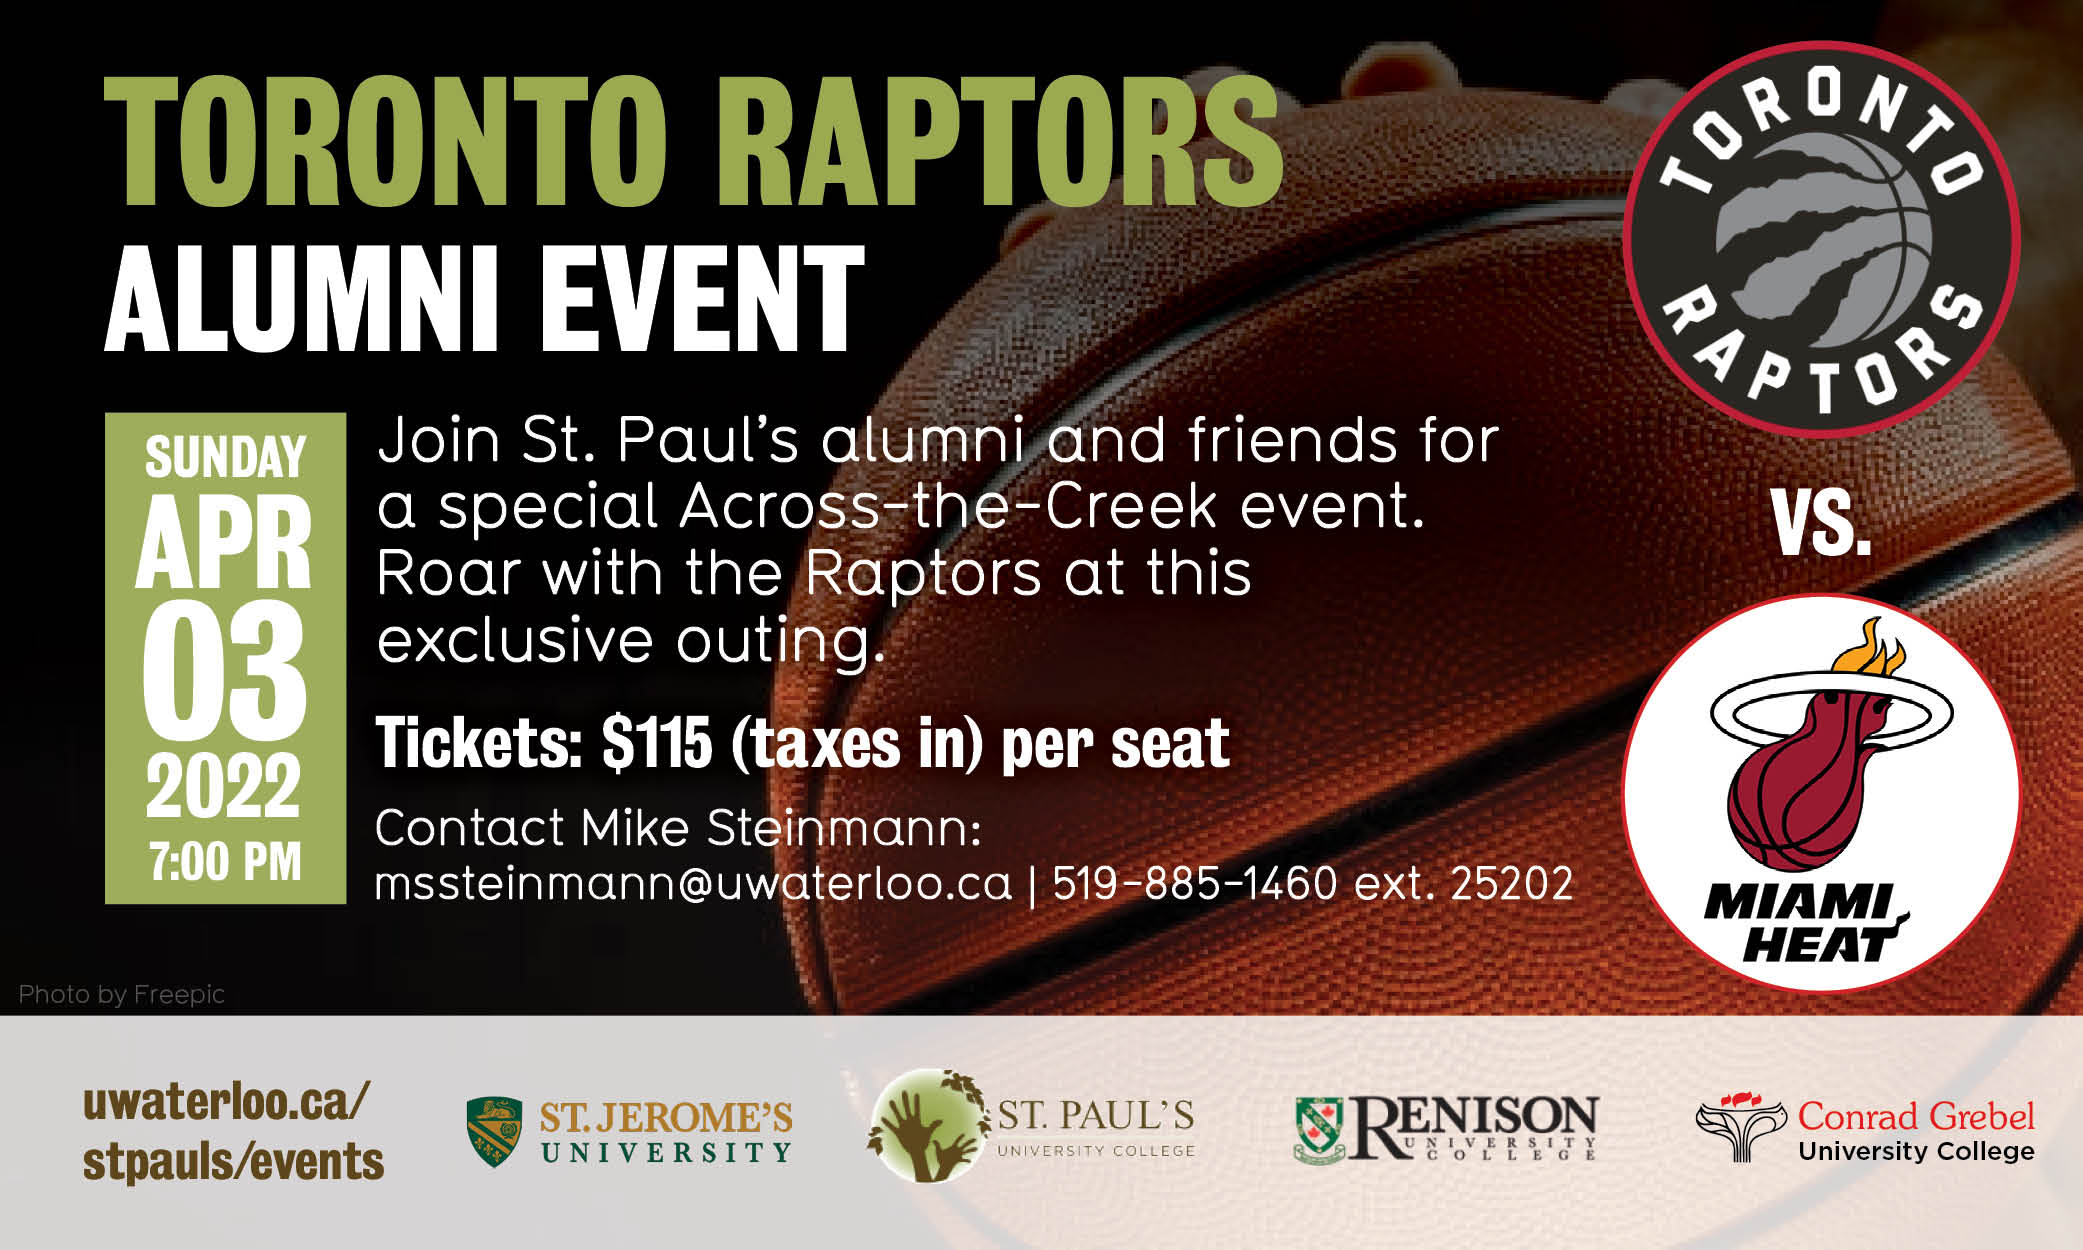 Toronto Raptors Alumni Event image, logos from Renison, Conrad Grebel, St. Jerome's and St. Paul's Colleges. Also appearing are logos for the Toronto Raptors and Miami Heat, as well as a basketball in the background.